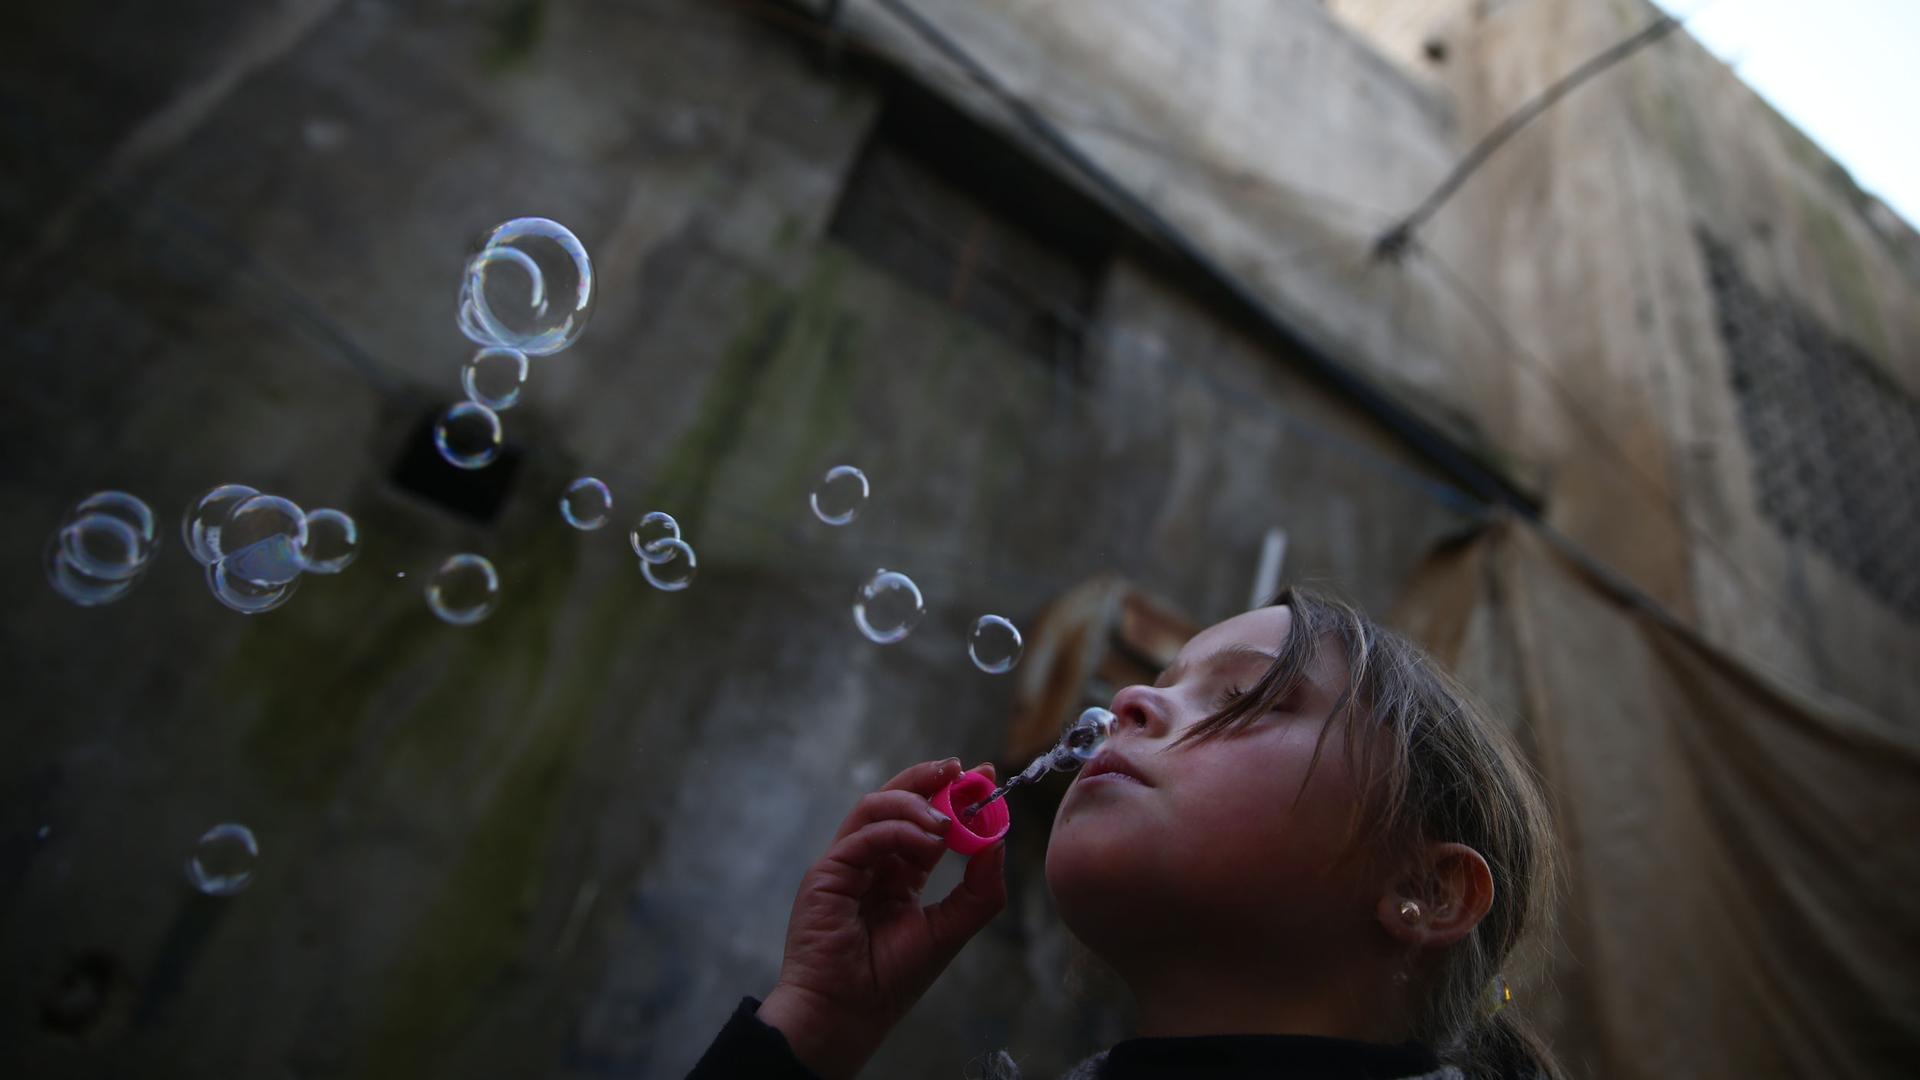 A young girl blows bubbles in the Douma neighborhood of Damascus, Syria, Jan. 19, 2017.